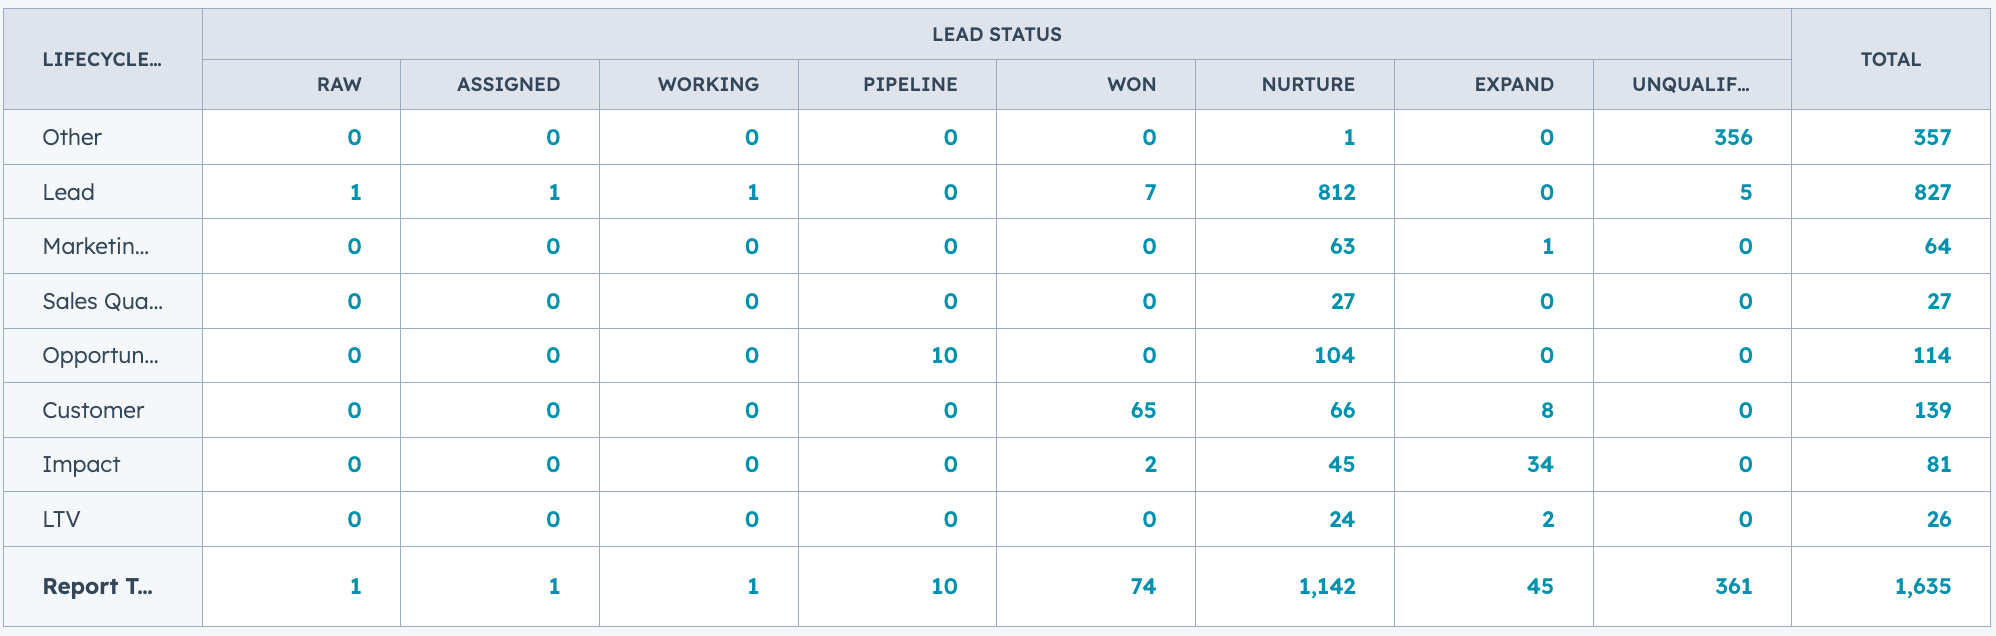 Lead Status and Lifecycle Stage